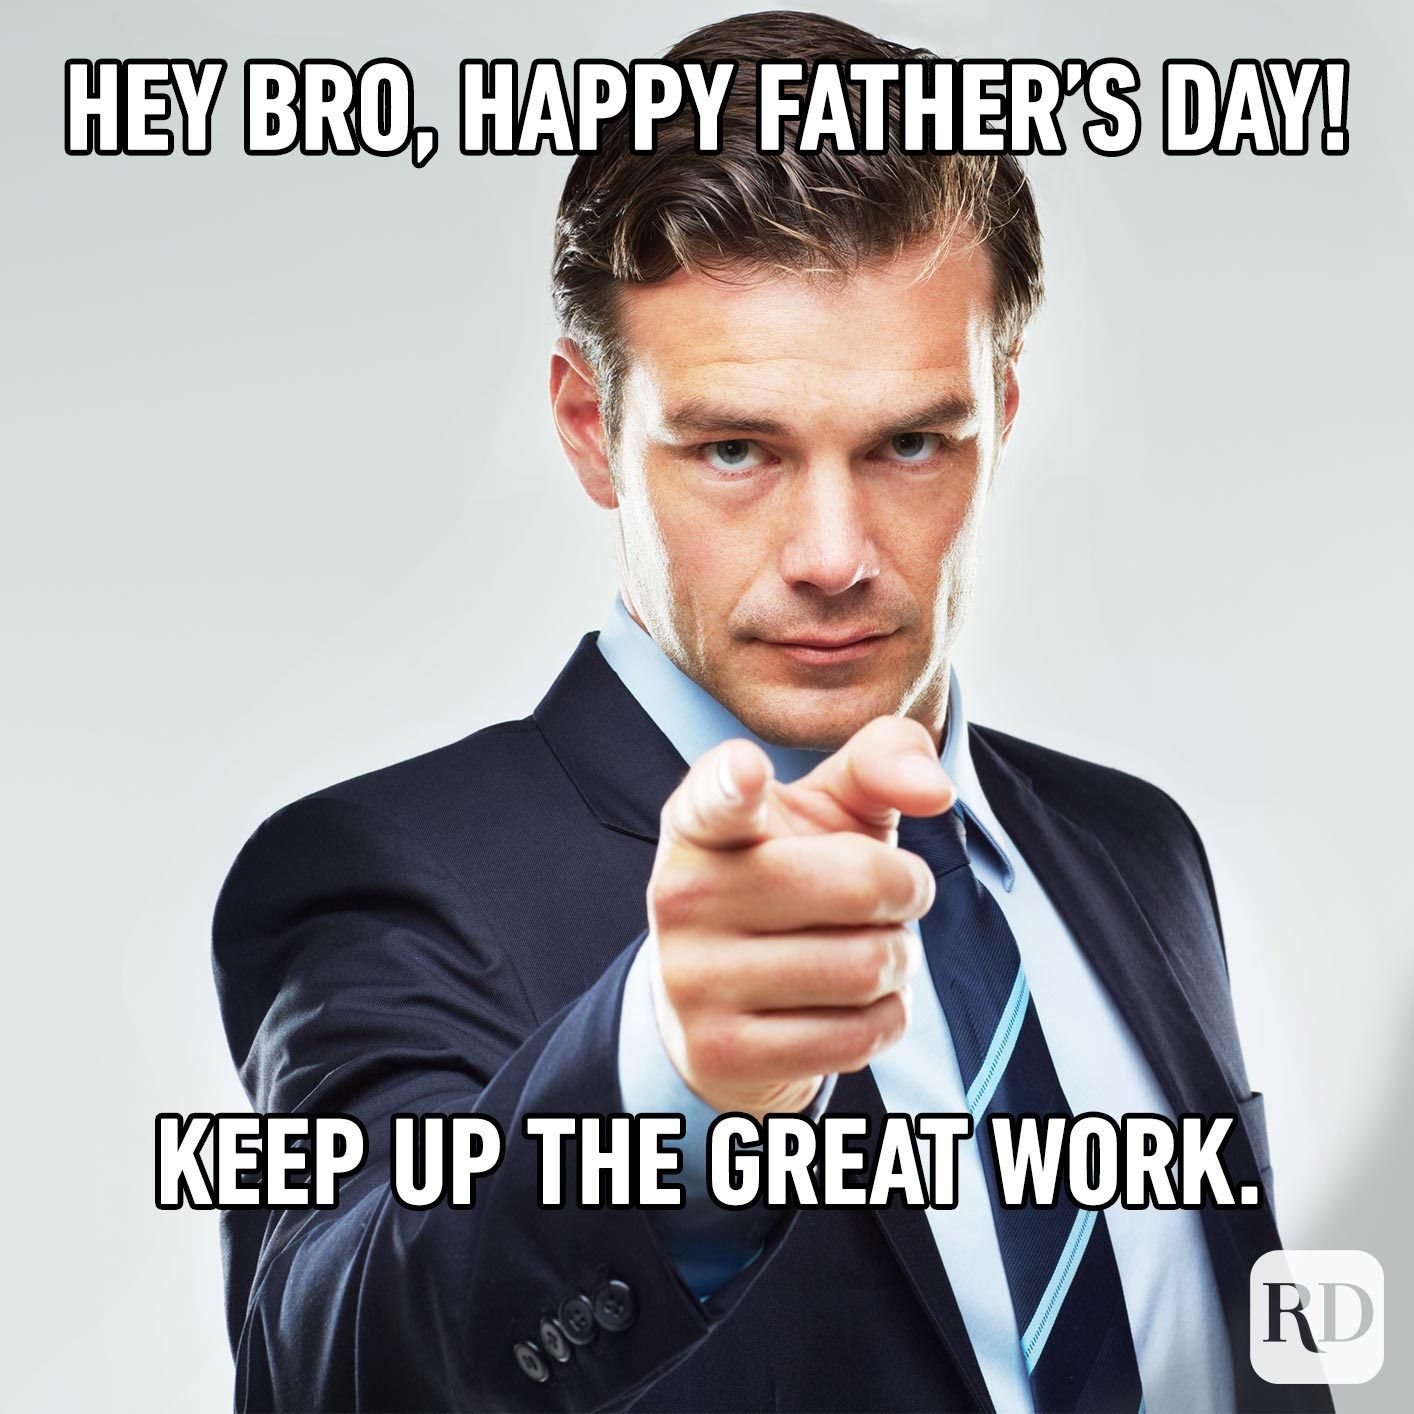 Man pointing at camera. Meme text: Hey bro, Happy Father's Day